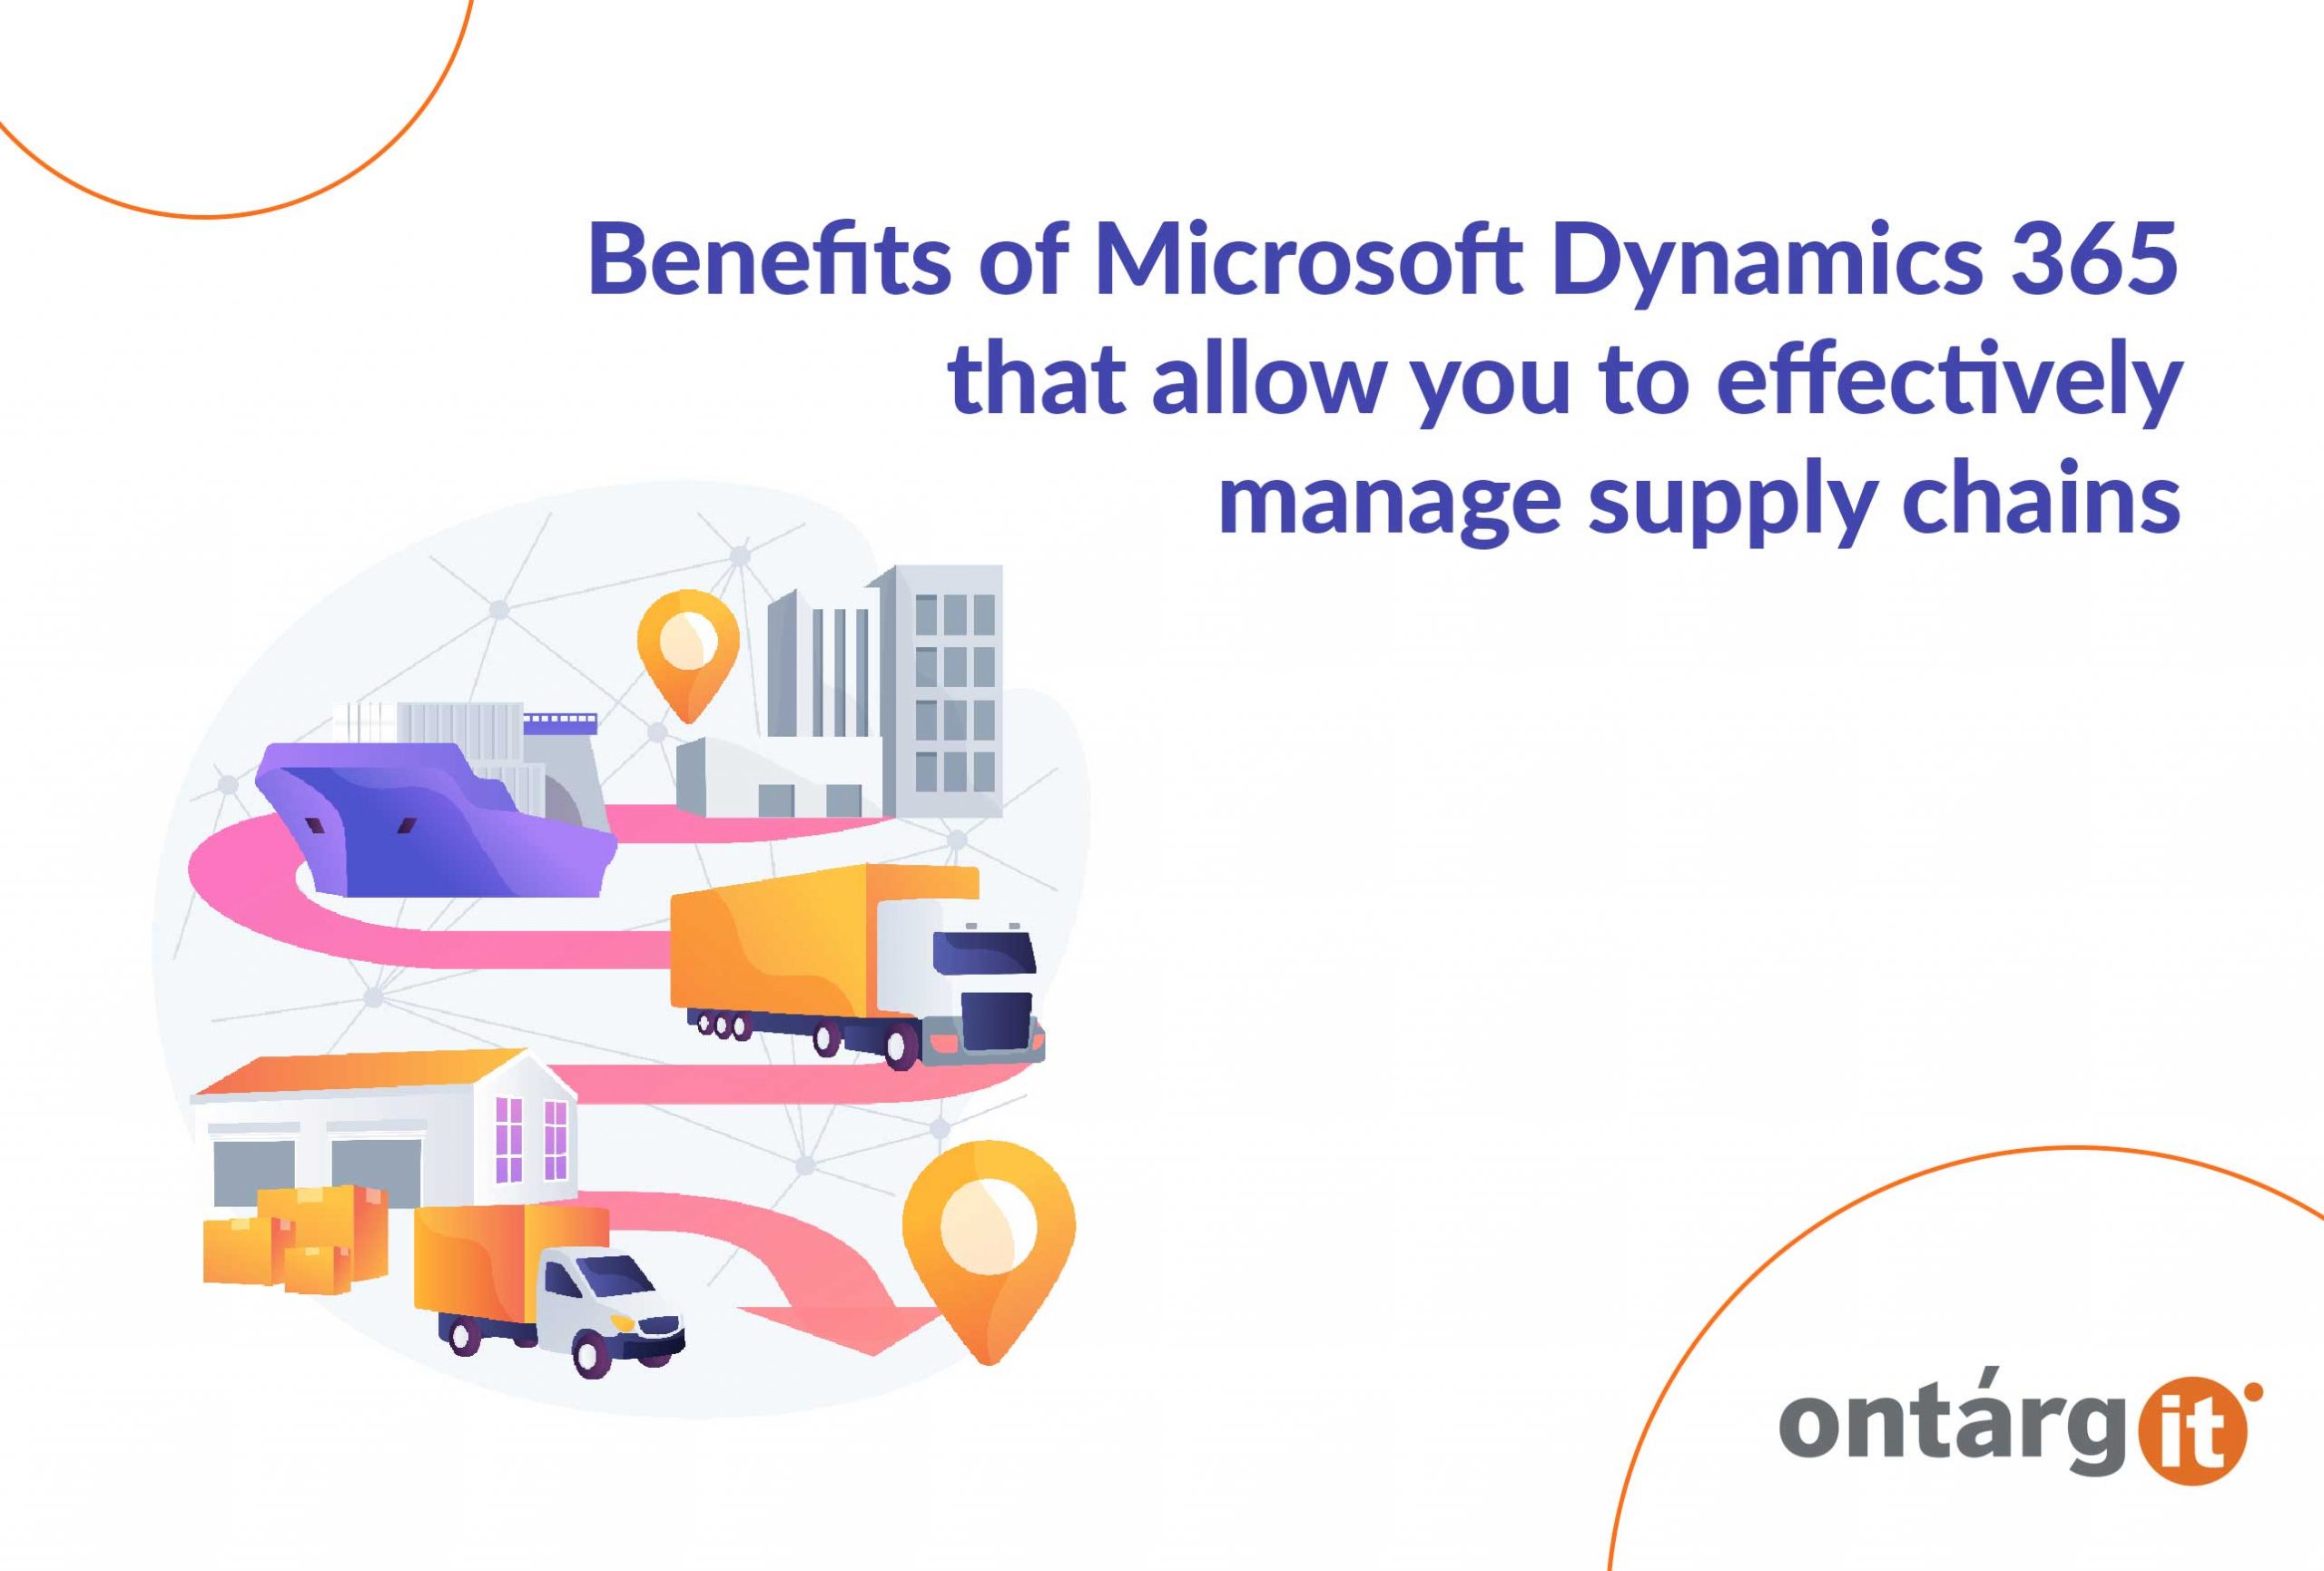 Benefits-of-Microsoft-Dynamics-365-that-allow-you-to-effectively-manage-supply-chains